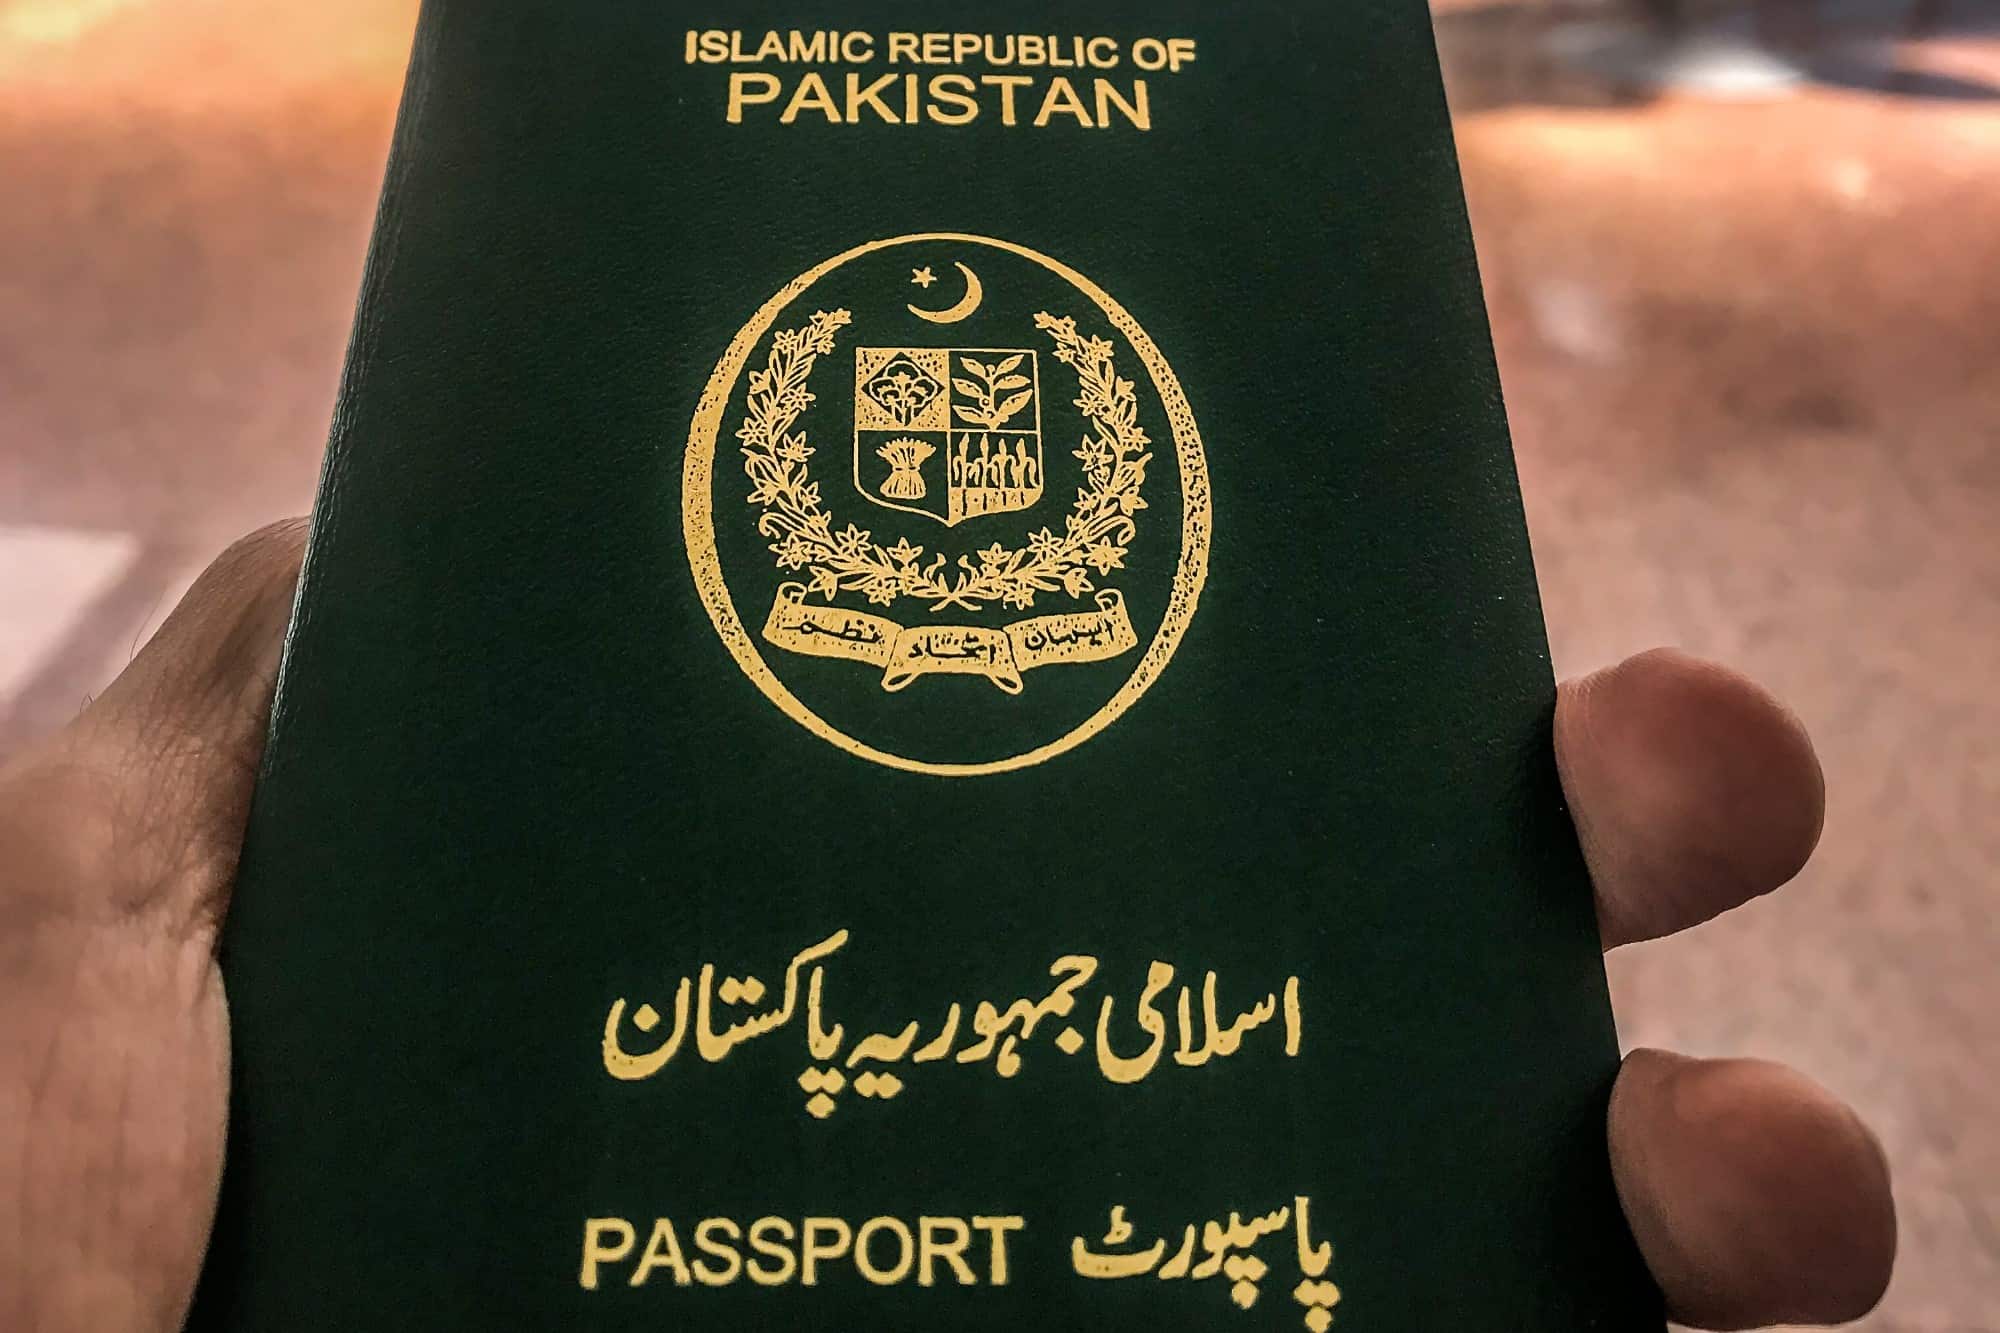 pakistani-passport-ranked-as-4th-worst-in-the-world